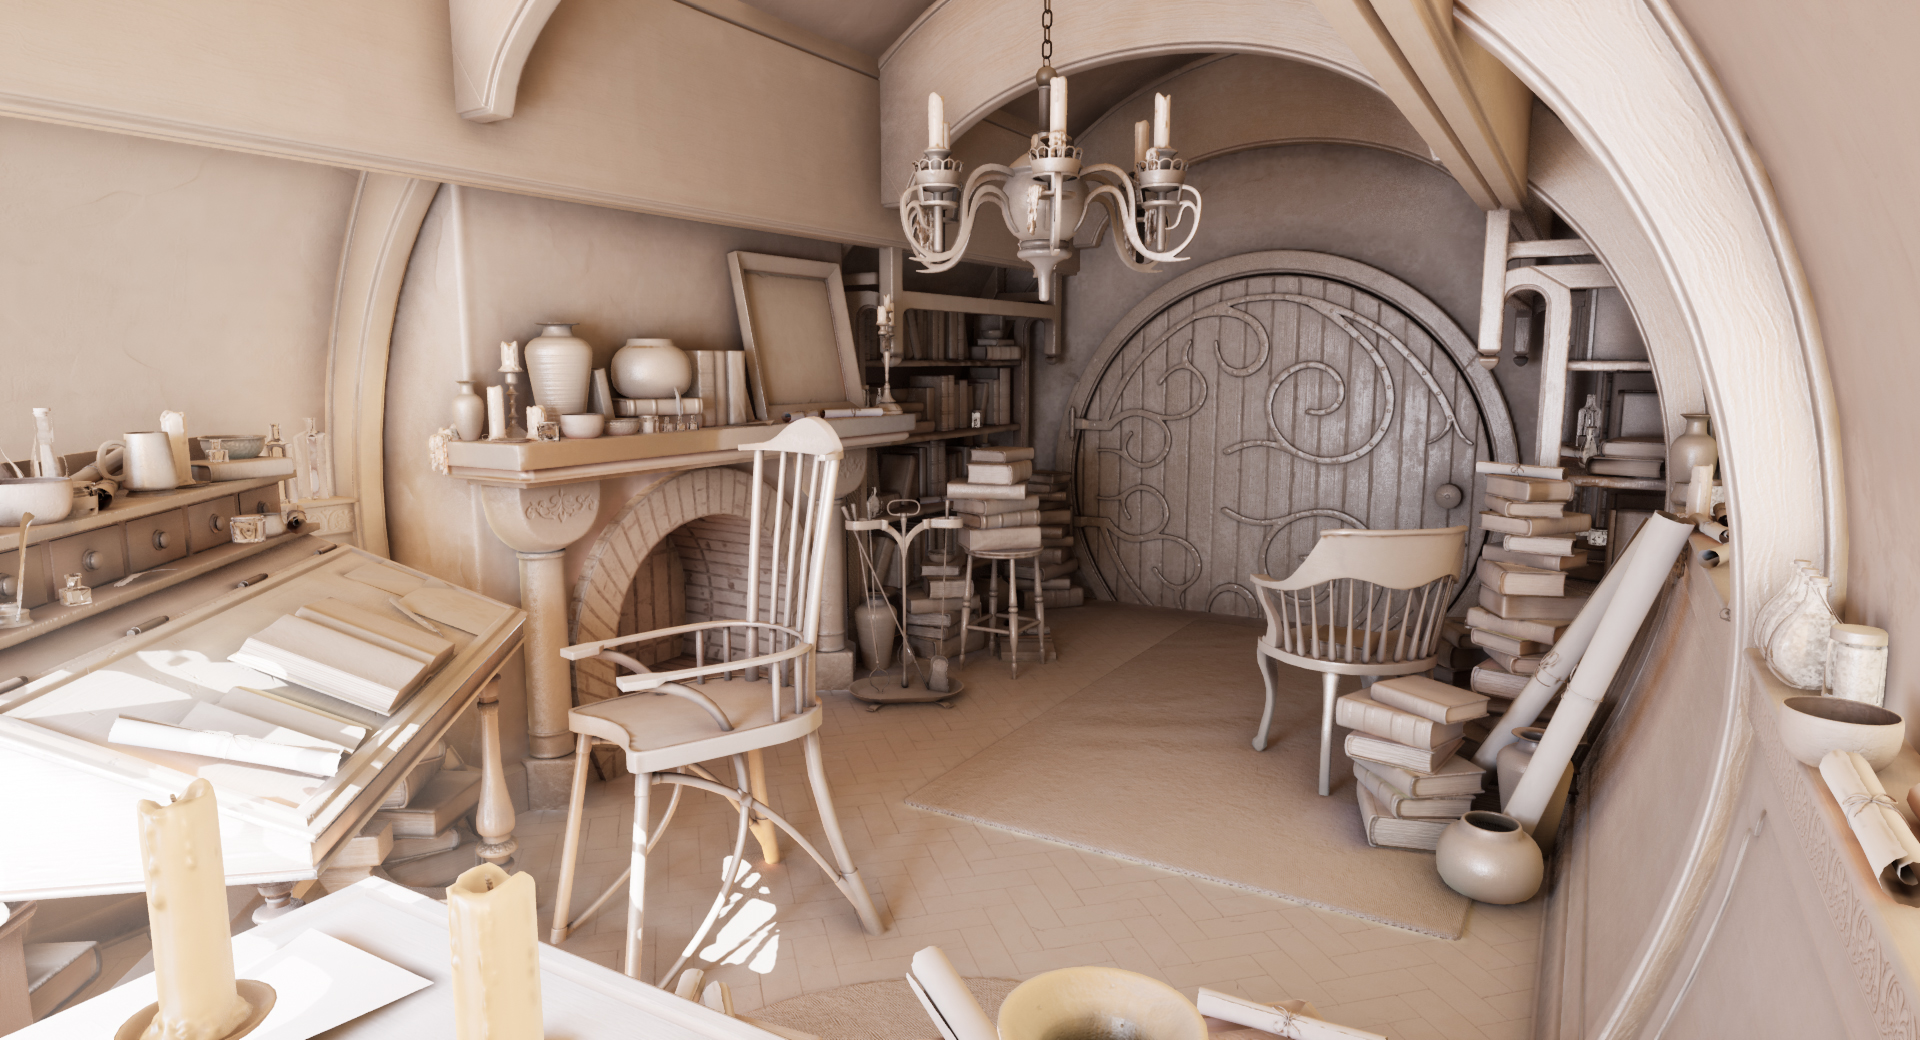 Cozy Clutter: Working on a Lived-In Hobbit Hole Interior